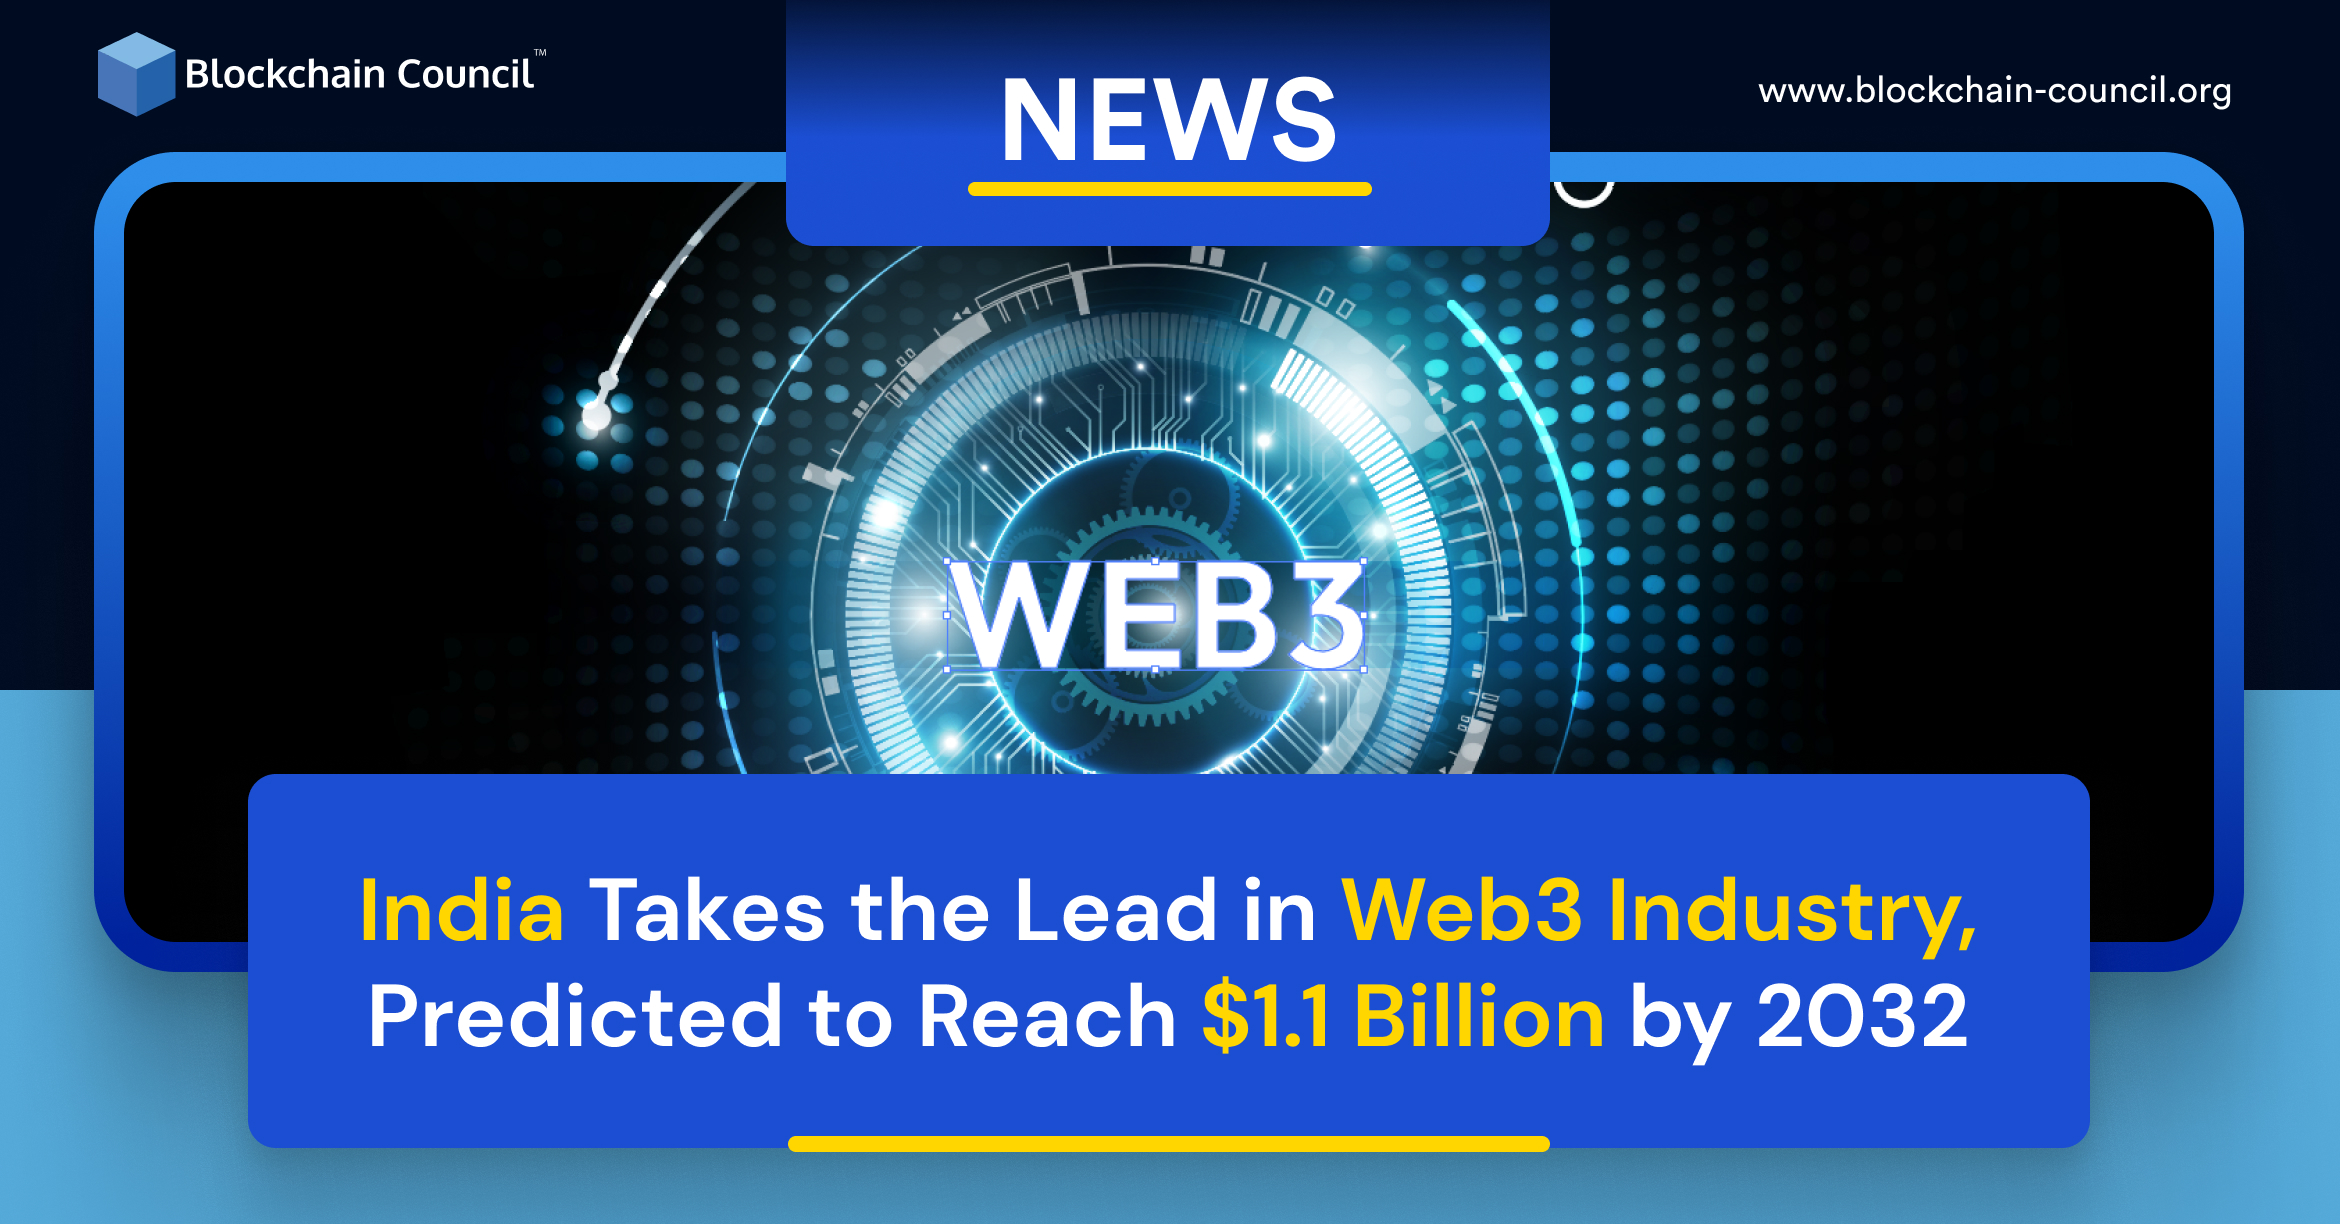 India Takes the Lead in Web3 Industry, Predicted to Reach $1.1 Billion by 2032